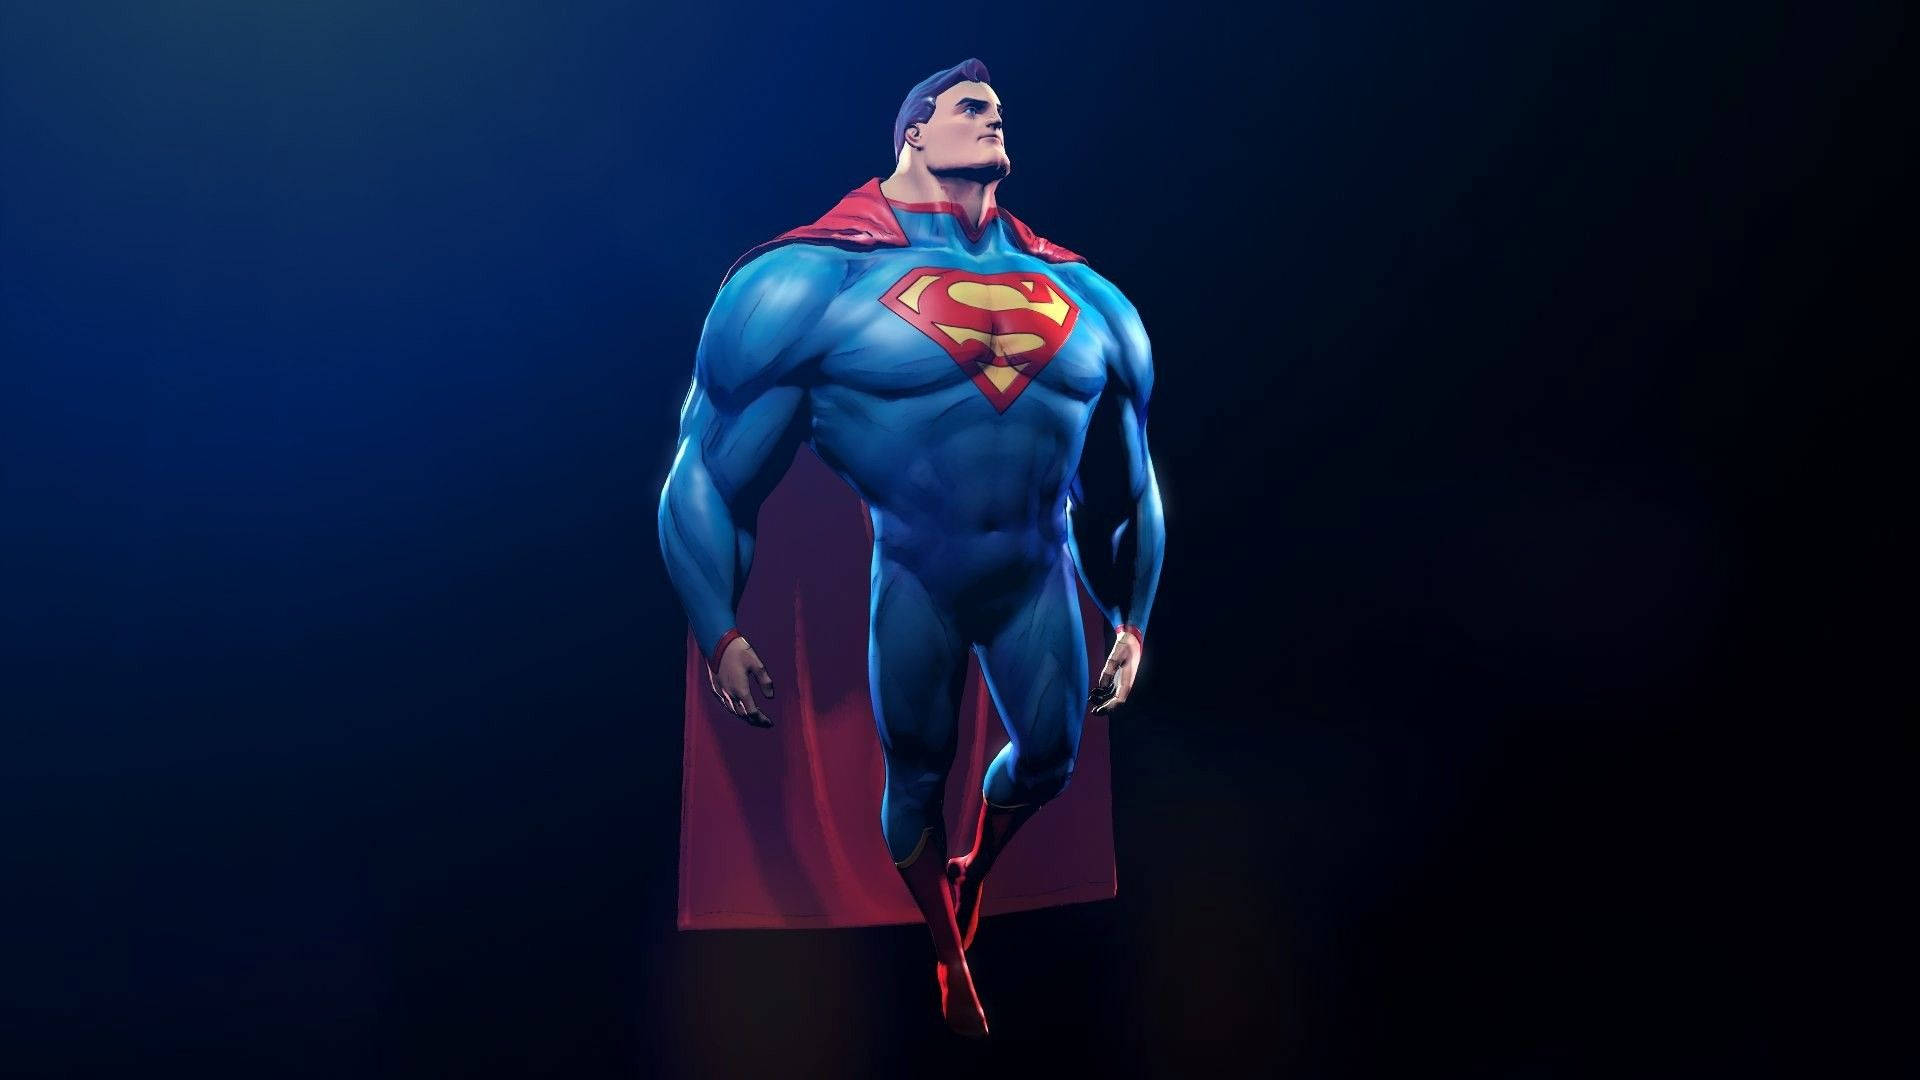 Superman stands atop a building, ready to protect the city. Wallpaper